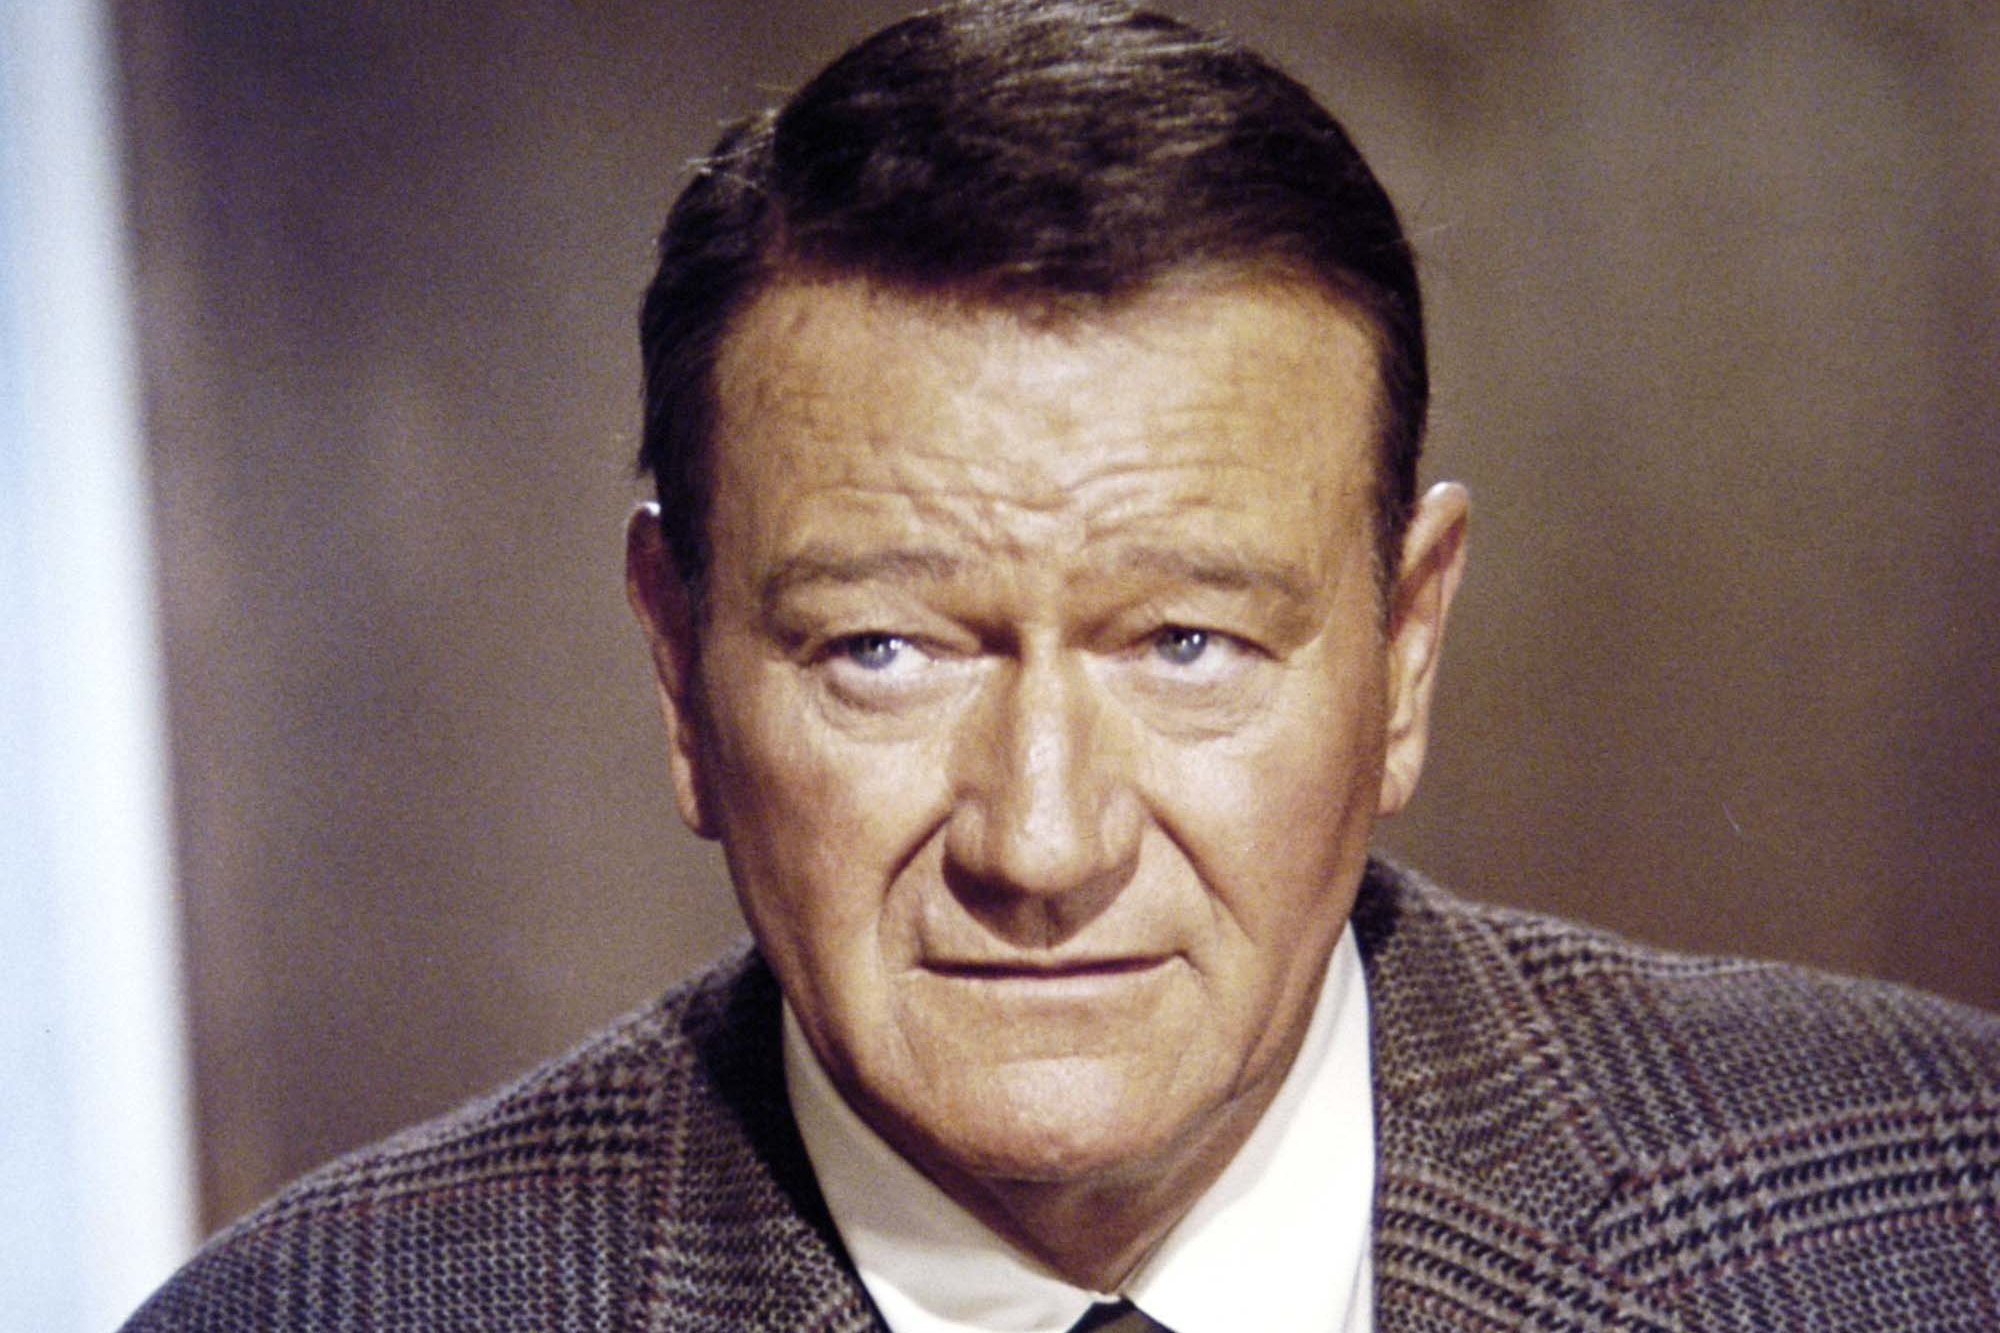 Acting legend John Wayne wearing a suit and tie with a plain look on his face